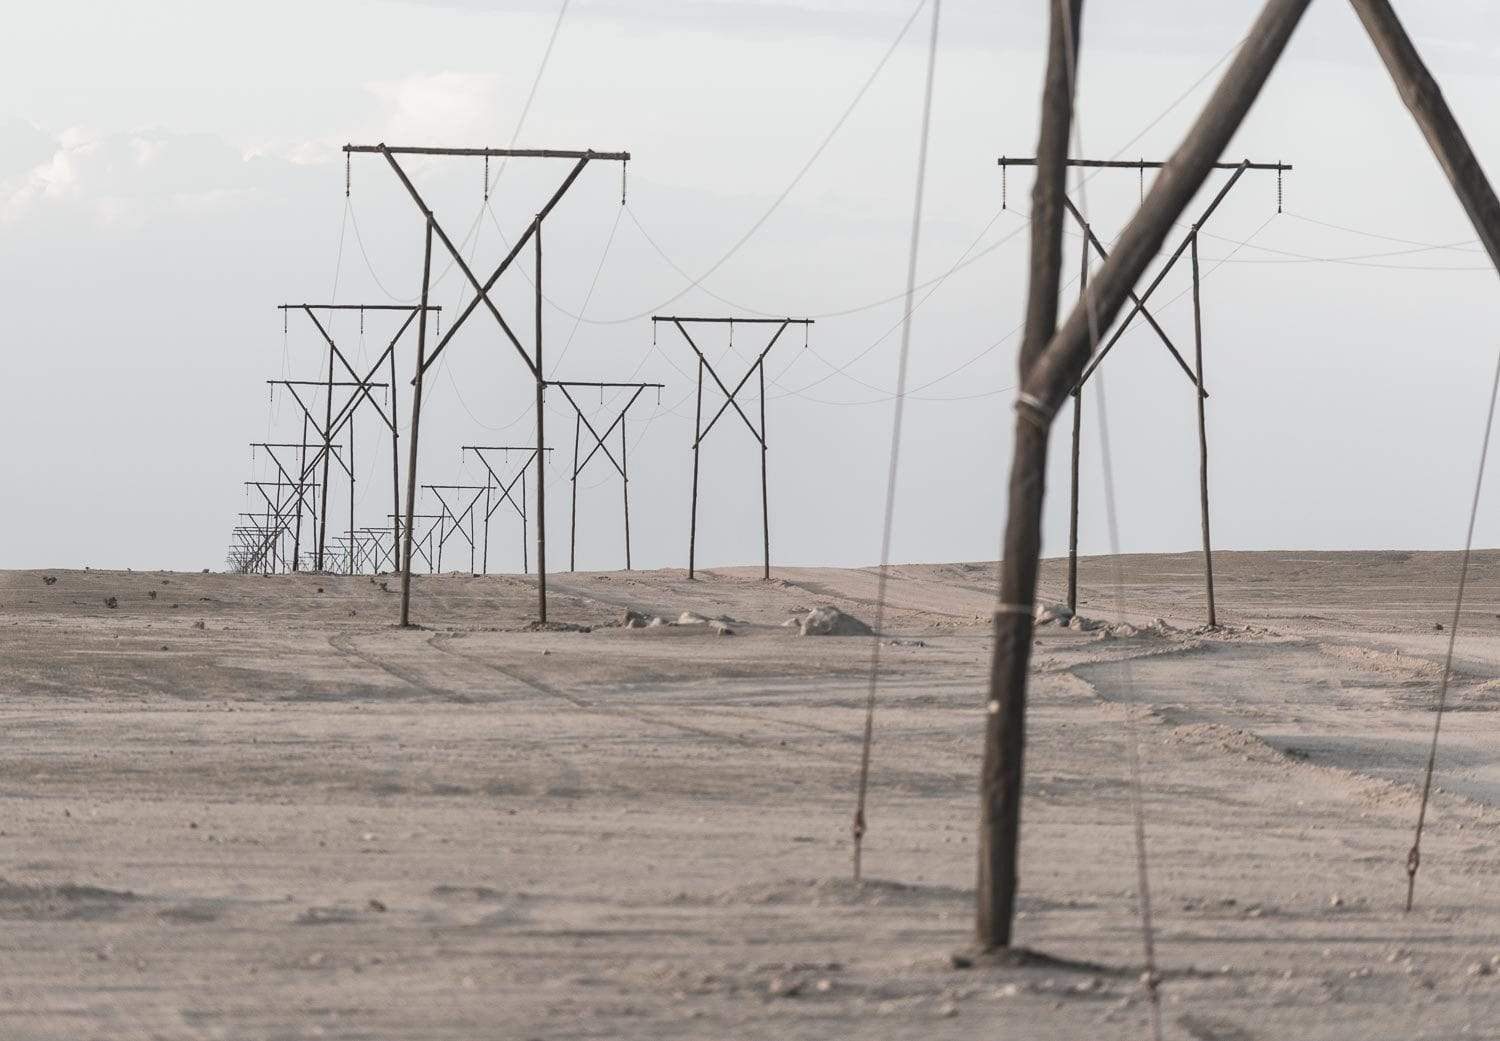 Long series of electricity towers with some wires connected, Namibia #9